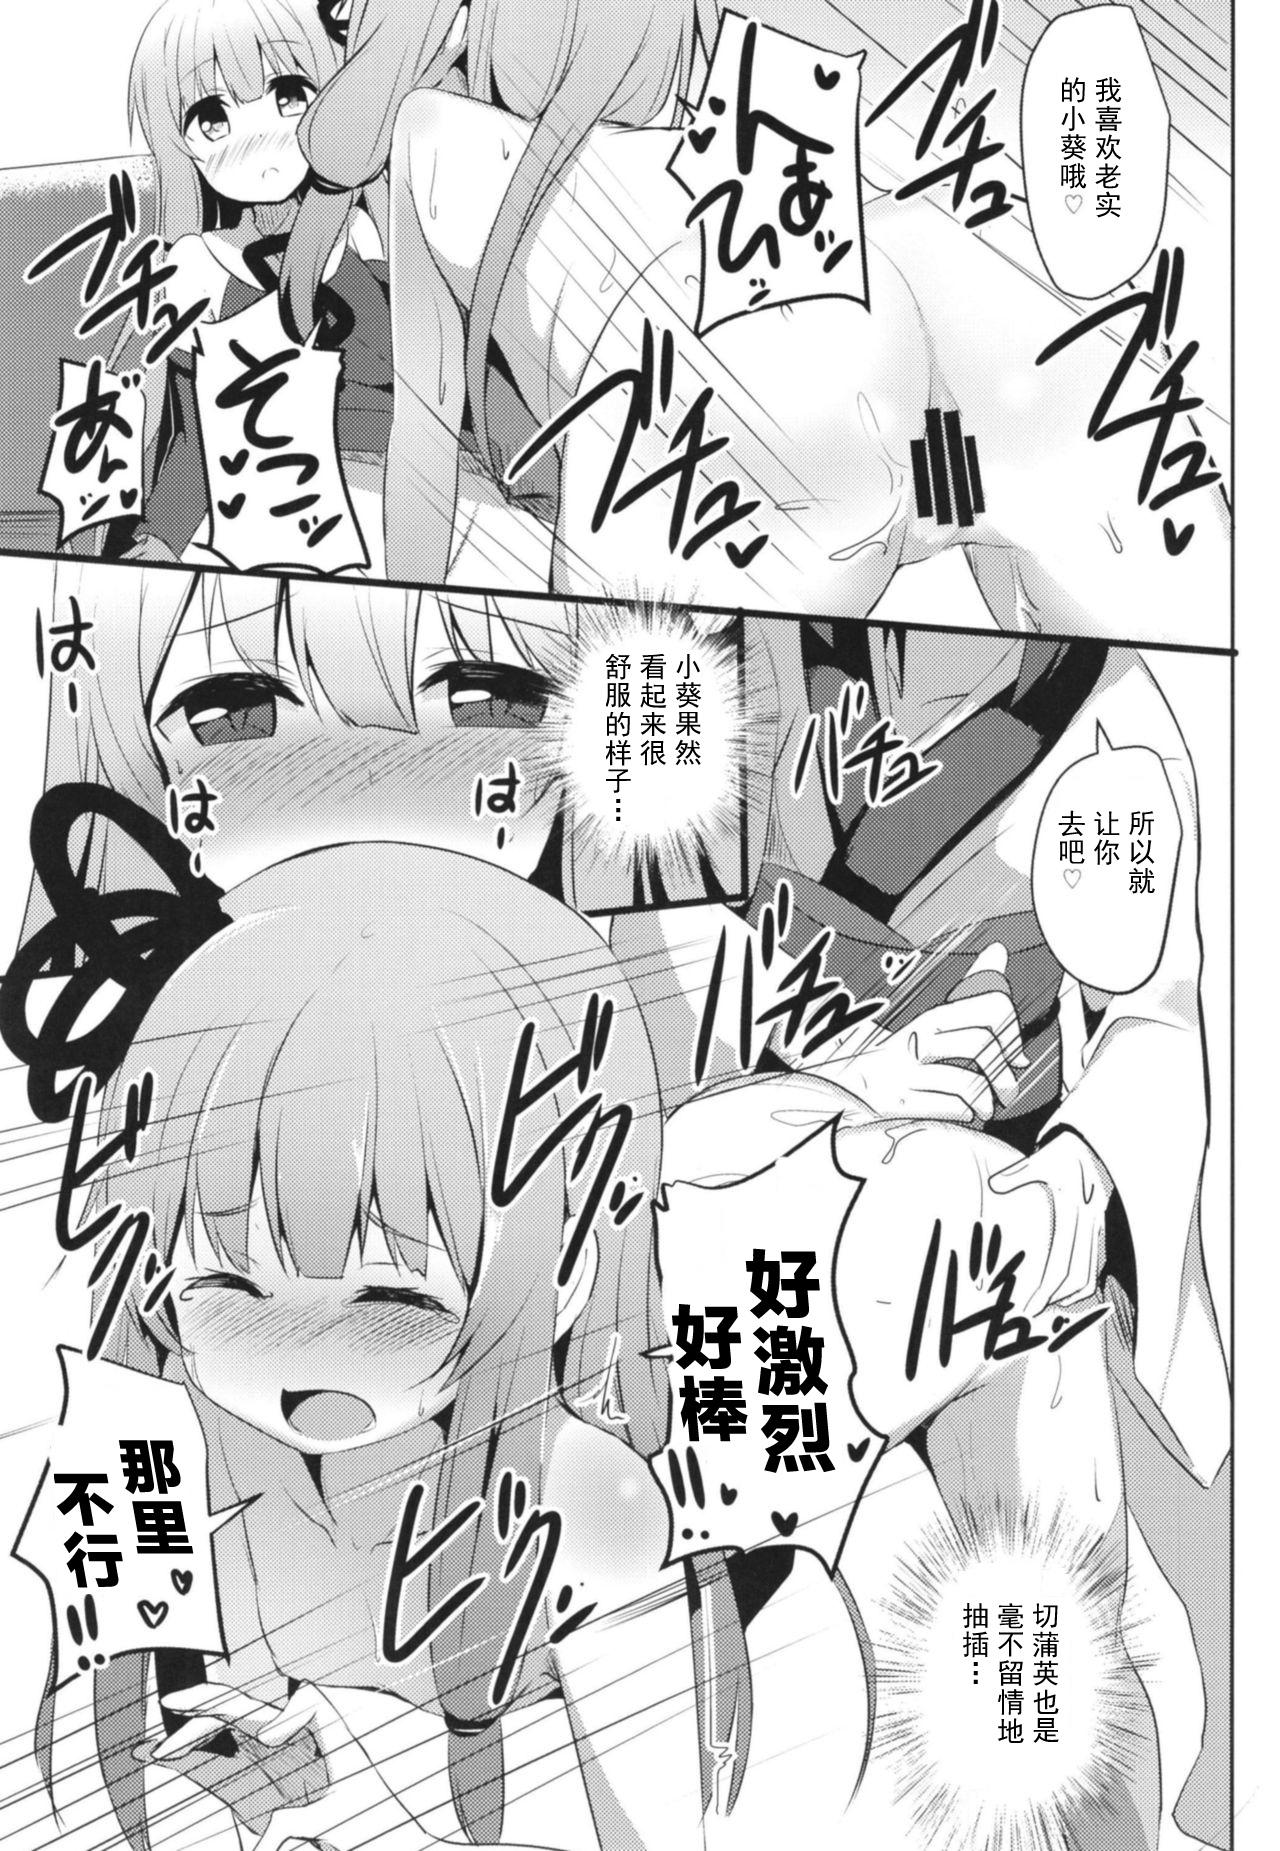 Madura [Milk Pudding (Jamcy)] Akane-chan Challenge! 4-kaime (VOICEROID) [Chinese] [古早个人汉化] [Digital] - Voiceroid China - Page 11